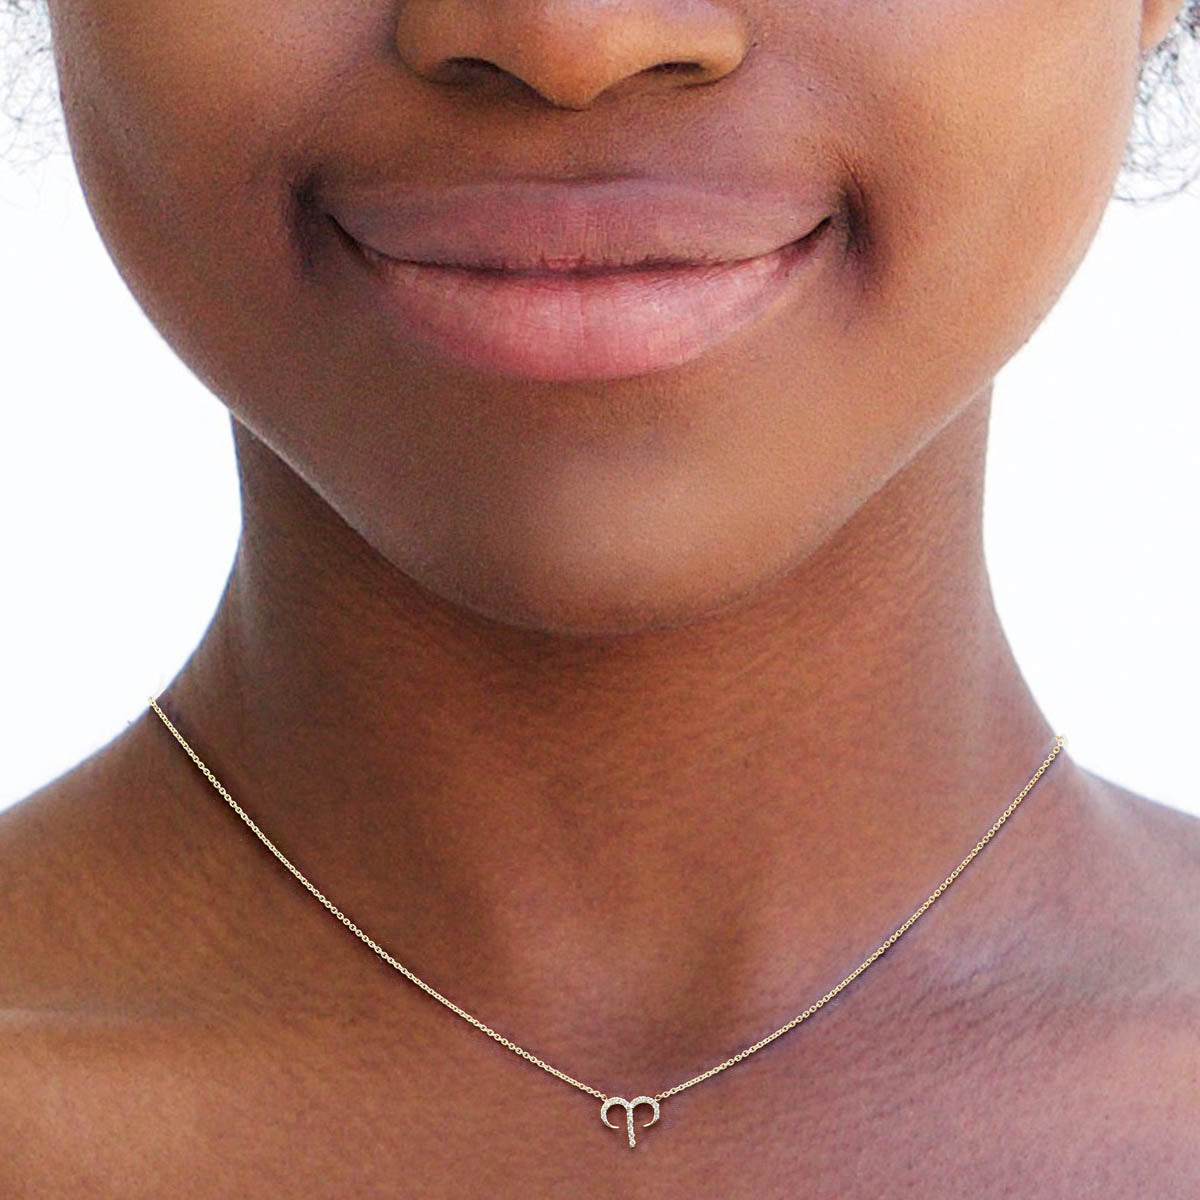 image of aries diamond necklace on womans neck